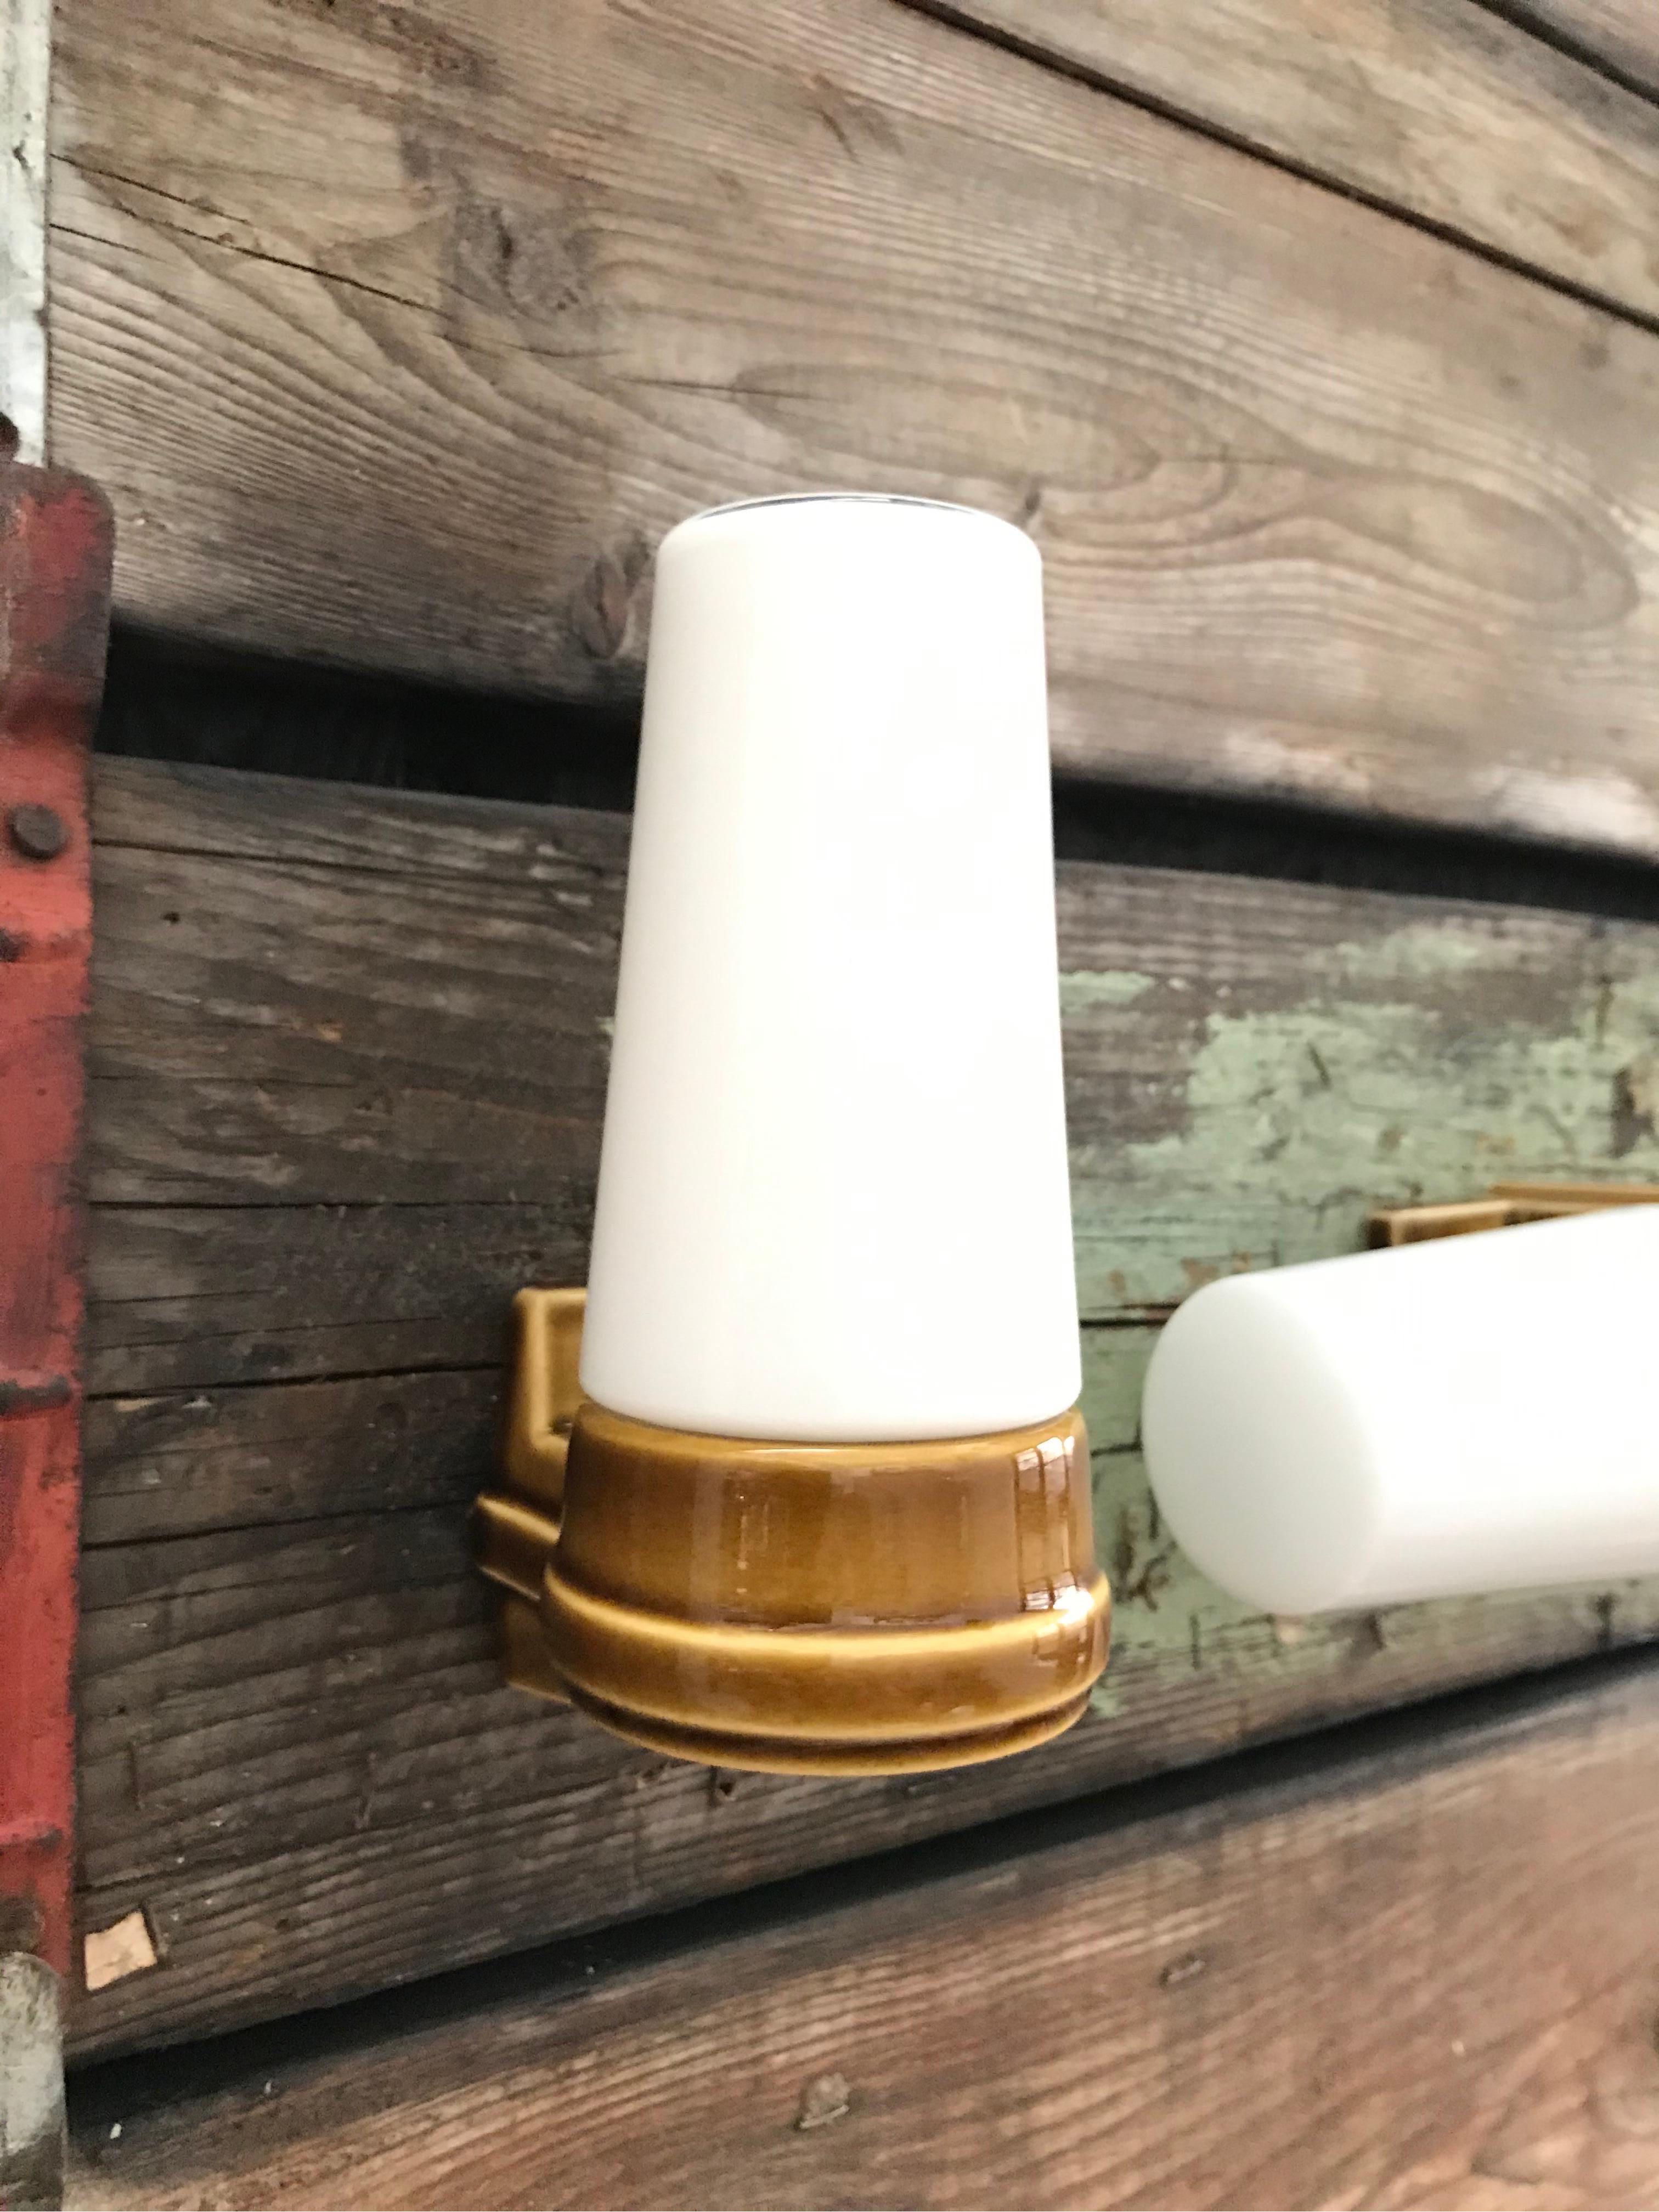 A set 3 vintage Ifö of Sweden ceramic bathroom lamps model 6035 and 6060 from the 1960s in tan.
Designed by Sigvard Bernadotte. 
Opaline glass shades. 
Ceramic bulb holders for an E15 bulb
Lamps can be used as up or down lights.
A set of 3 is